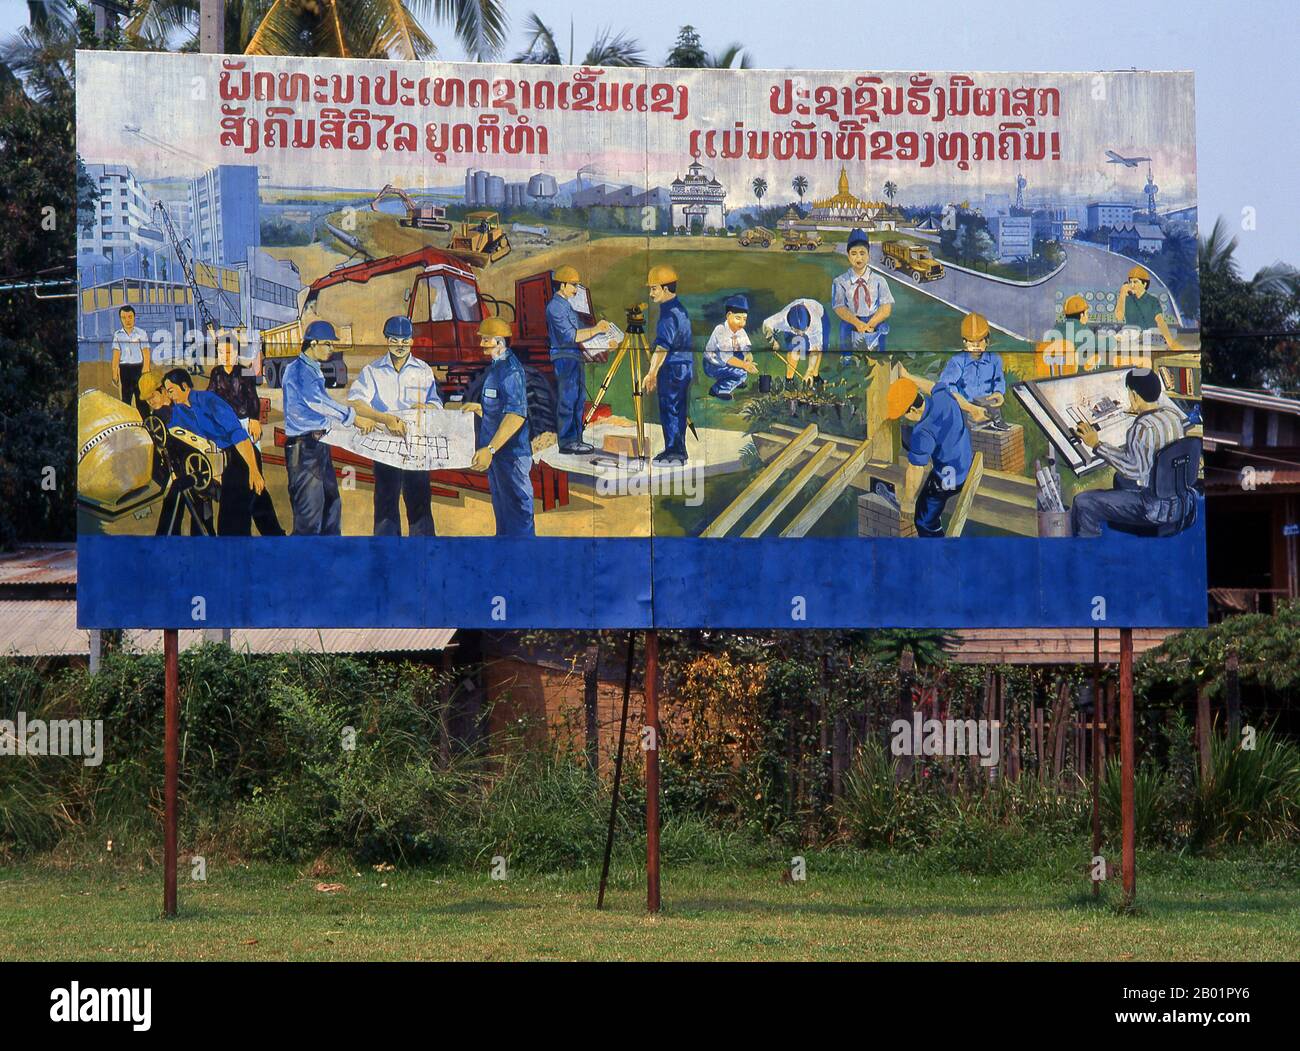 Laos: Construction and industry in Laos. Revolutionary Socialist realist-style political poster on the streets of Vientiane.  Socialist realism is a style of realistic art which was developed in the Soviet Union and became a dominant style in other communist countries. Socialist realism is a teleologically-oriented style having its purpose the furtherance of the goals of socialism and communism. Although related, it should not be confused with social realism, a type of art that realistically depicts subjects of social concern. Stock Photo